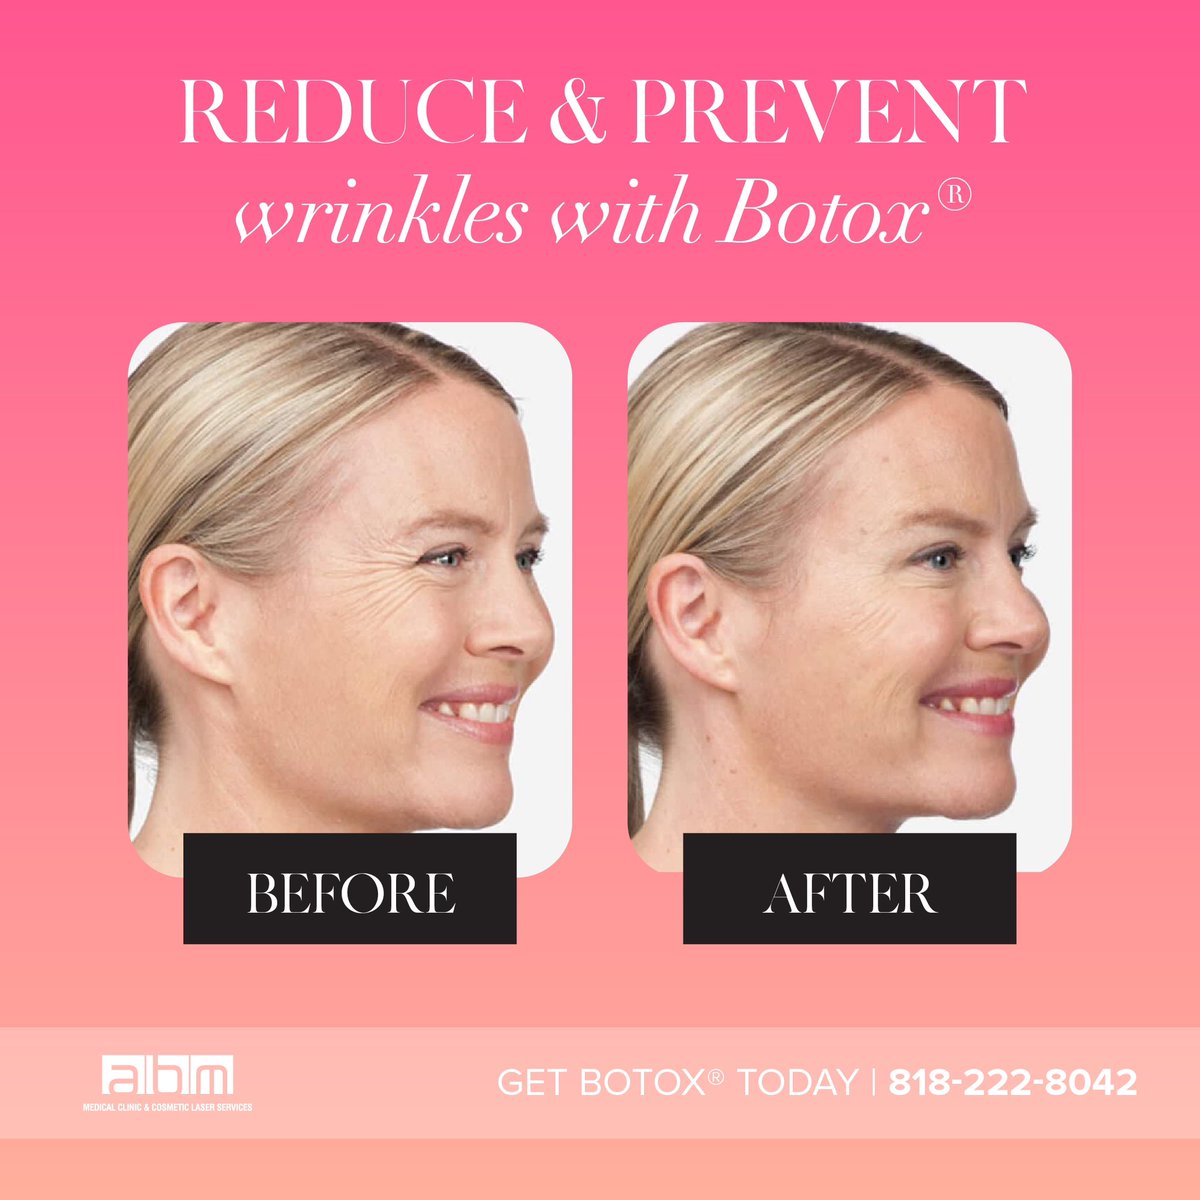 Botox in LA all injections performed by doctors ABMmedical.com